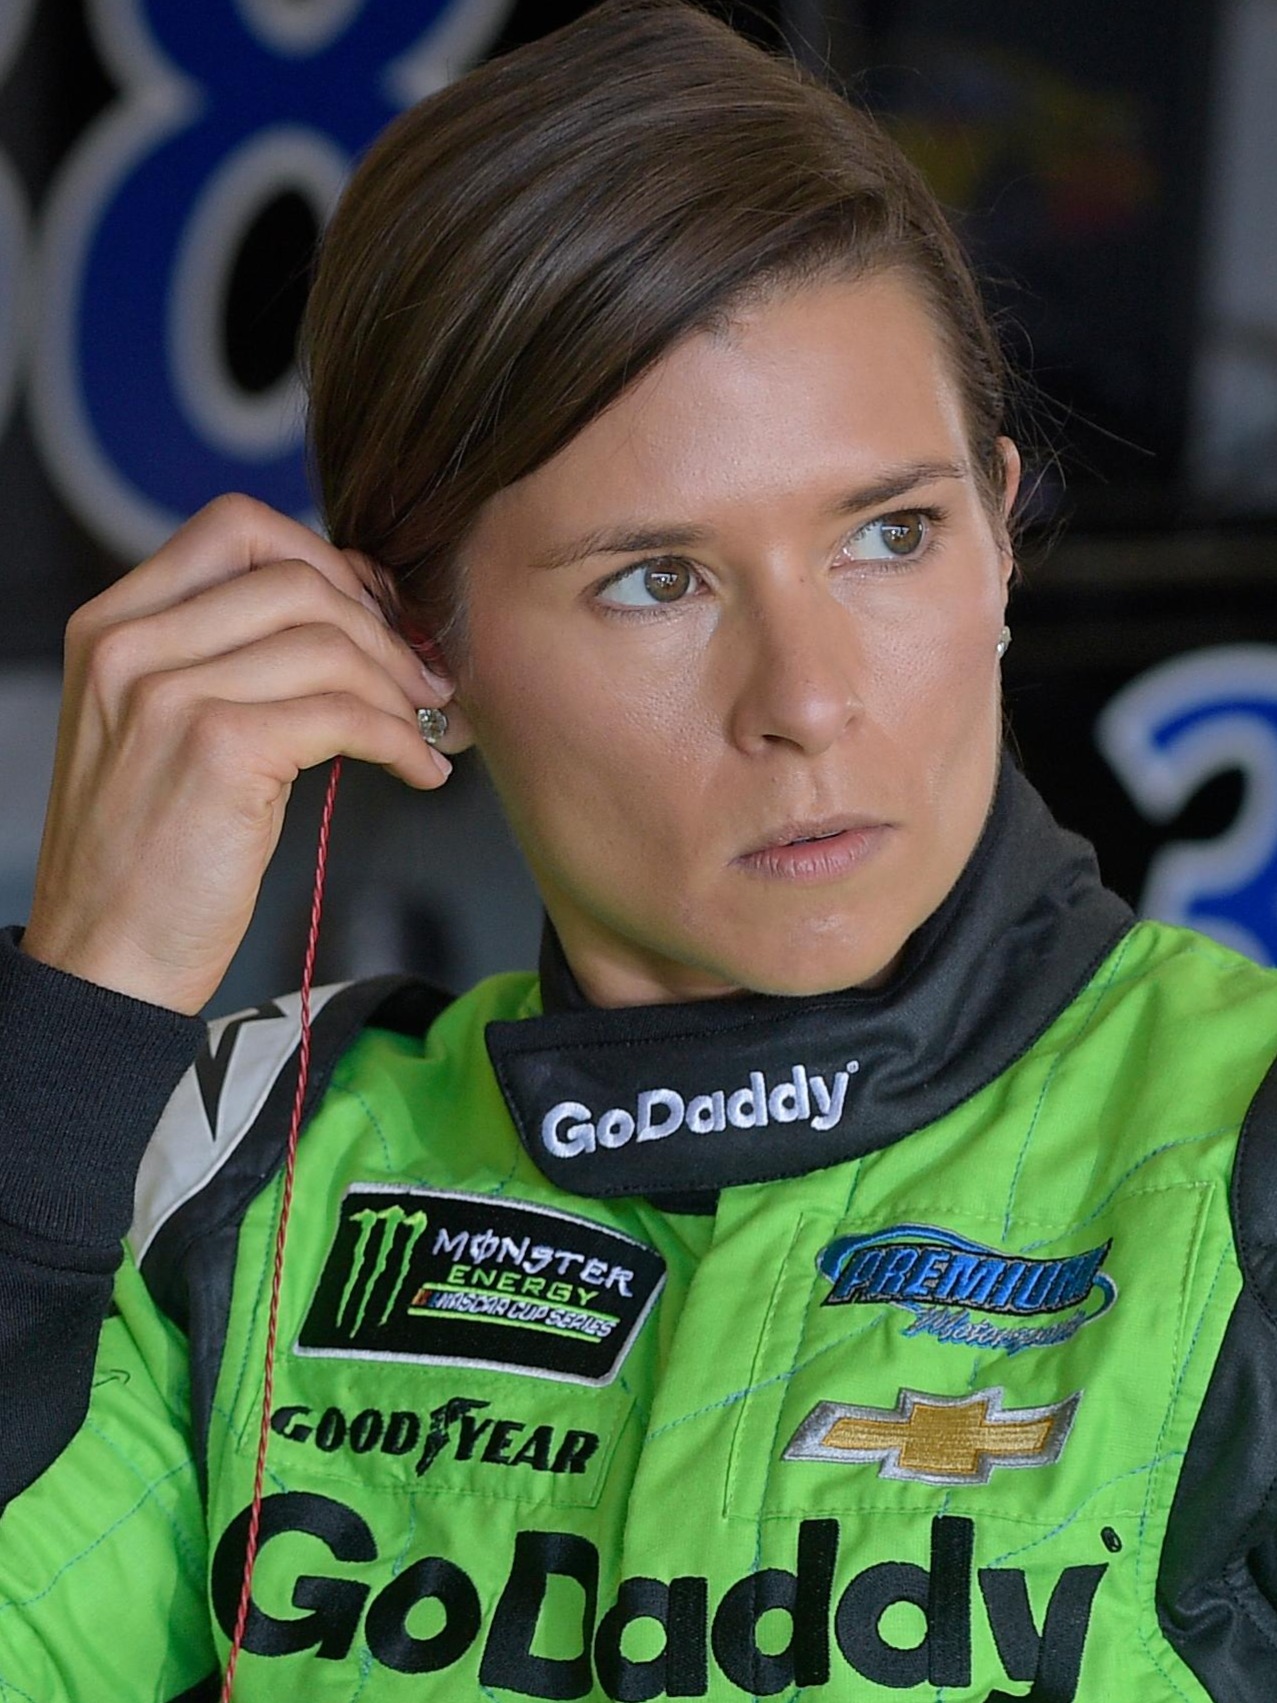 In which year did Danica Patrick make her debut in the IndyCar Series?